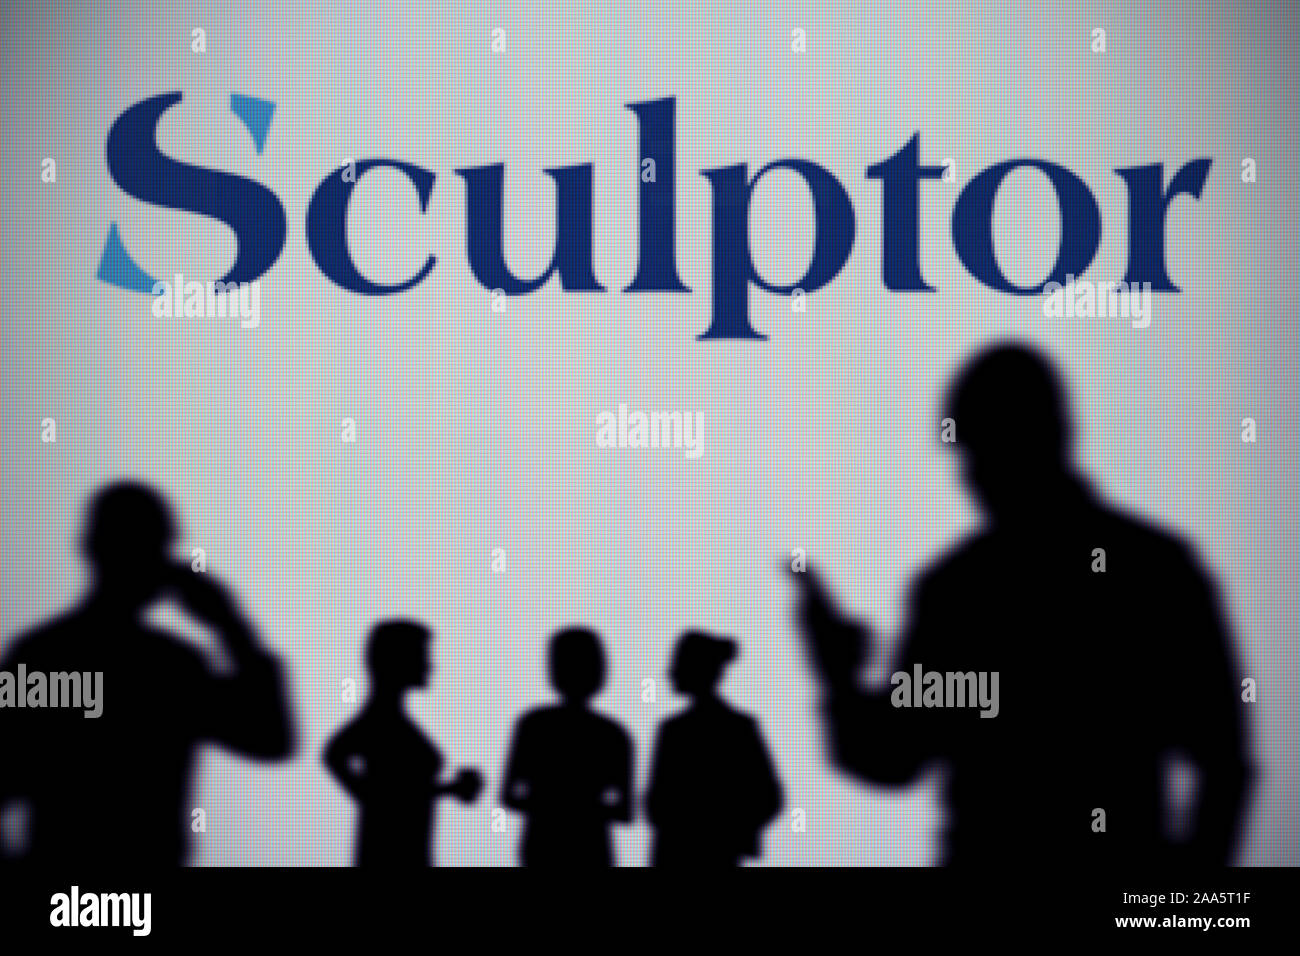 The Sculptor Capital Management logo is seen on an LED screen in the background while a silhouetted person uses a smartphone (Editorial use only) Stock Photo